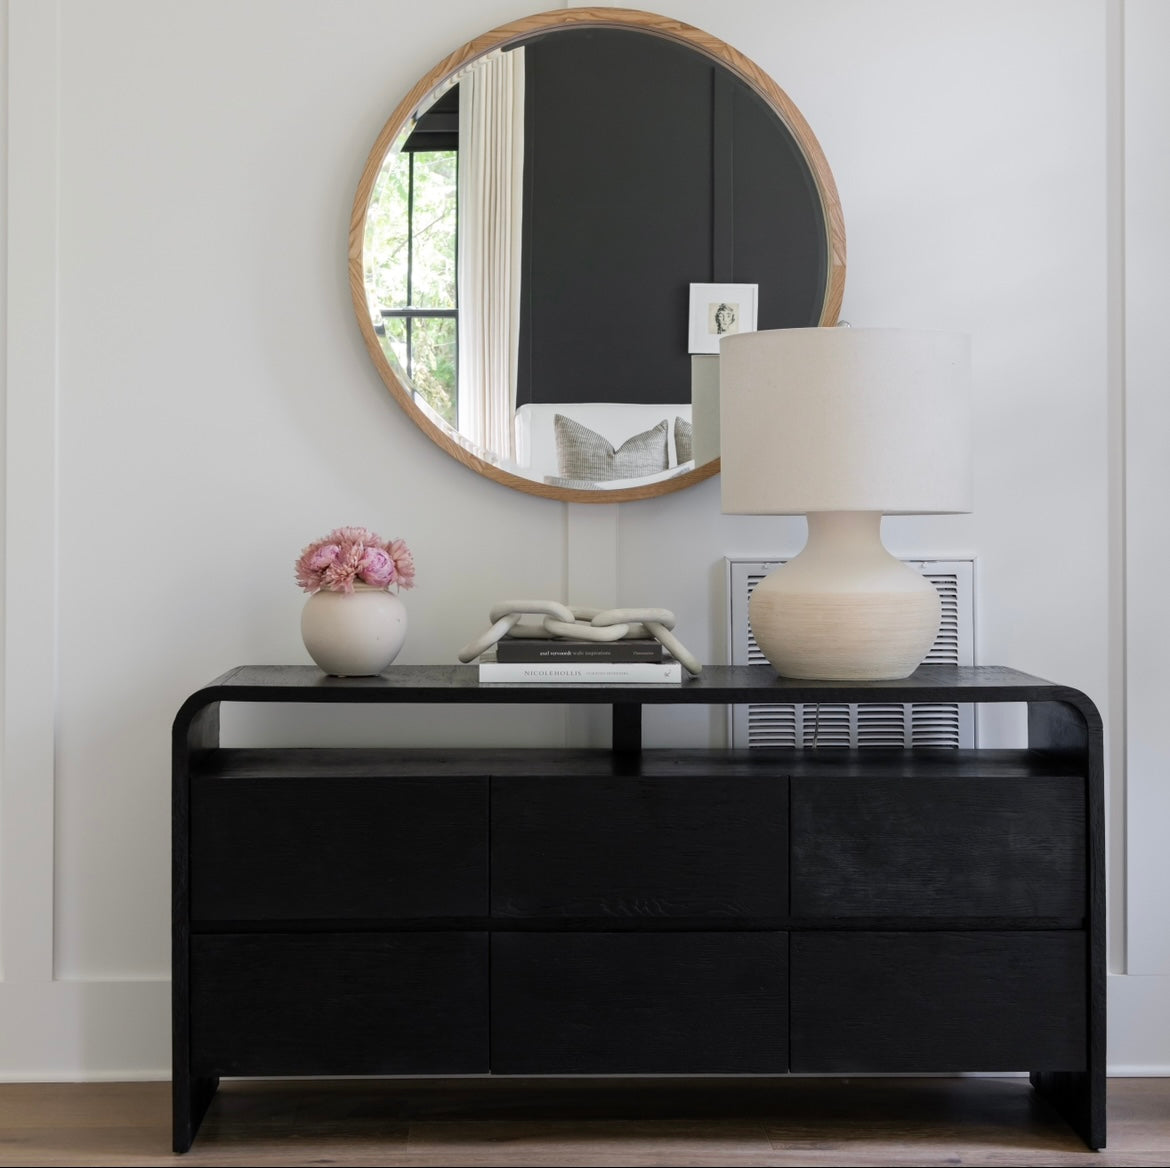 DRESSERS AND NIGHTSTANDS